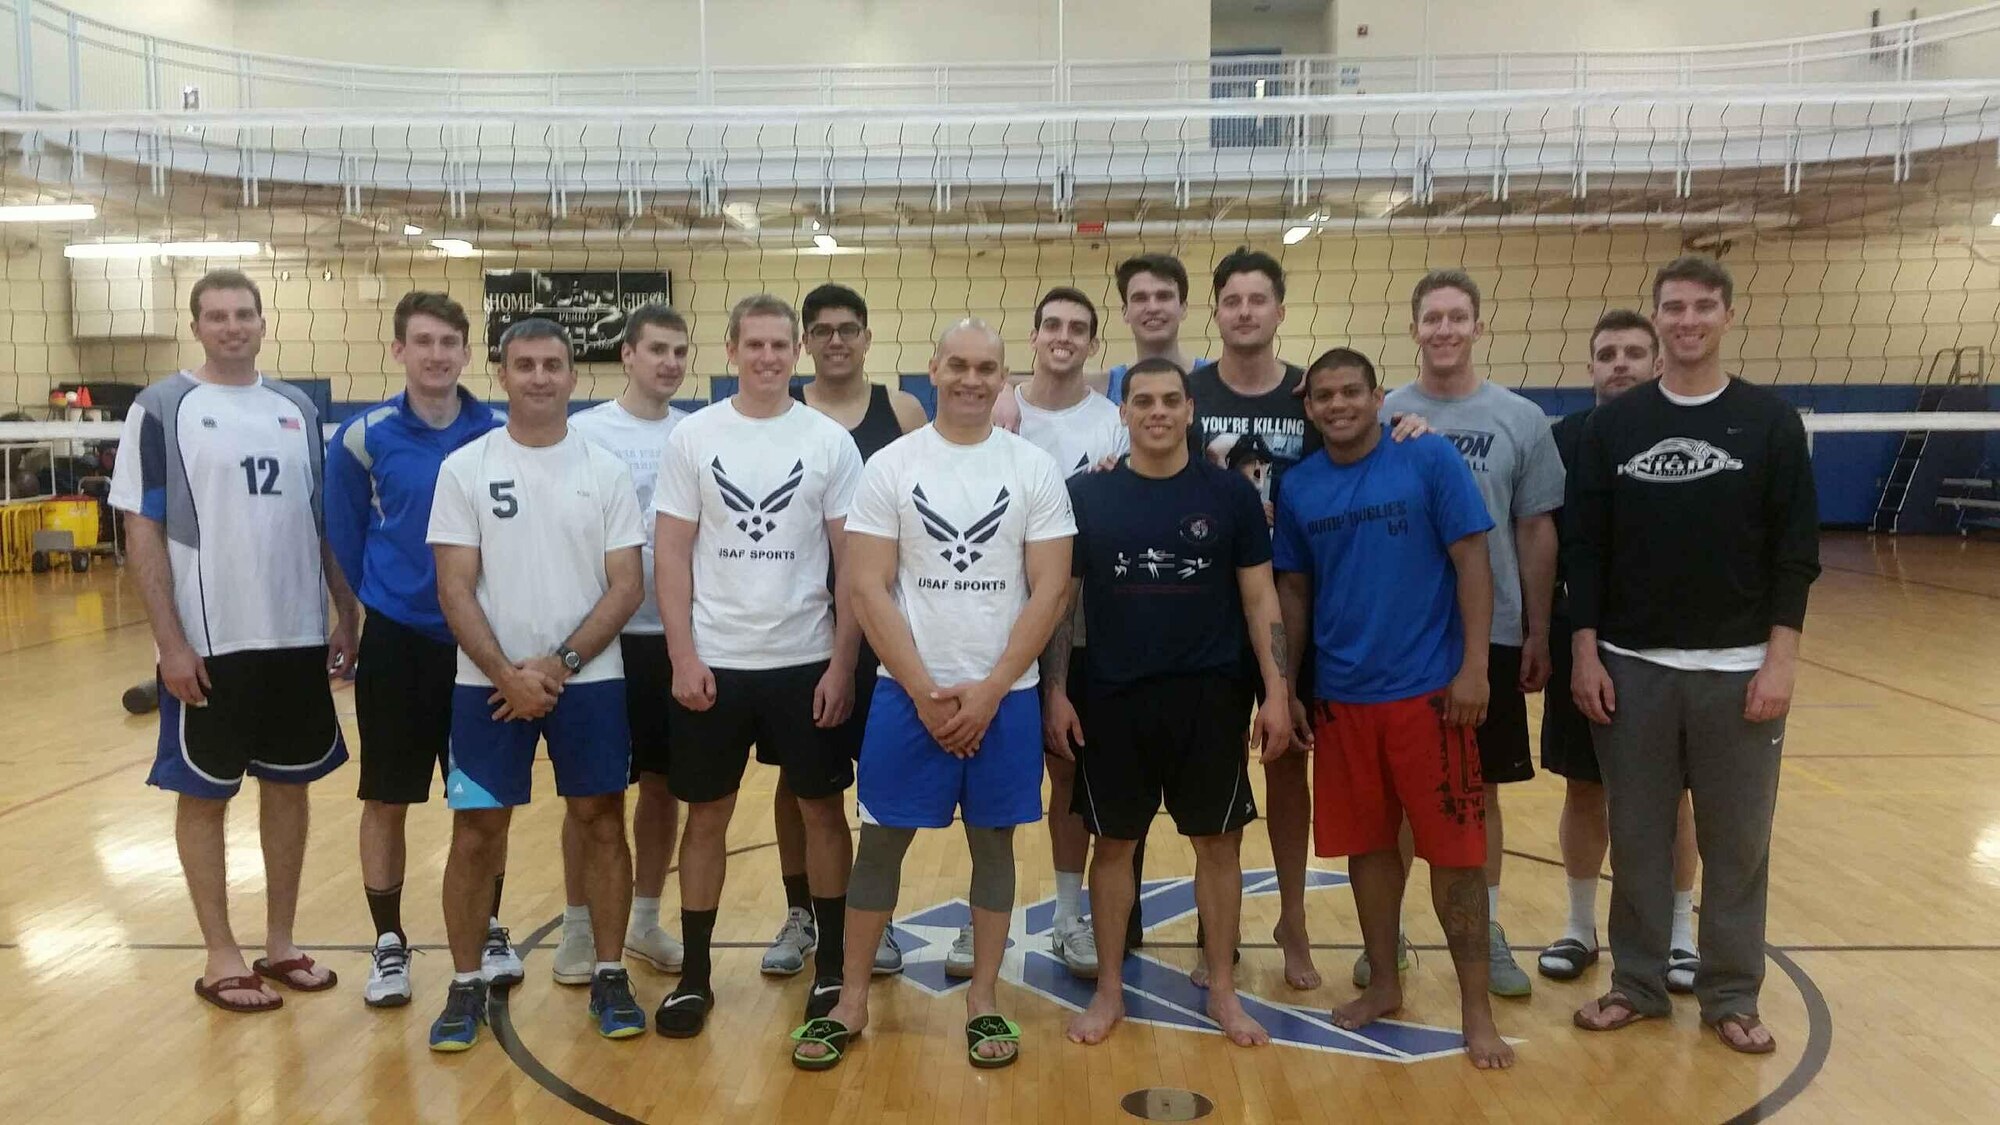 Senior Airman Jan C. Flores, 9th Aircraft Maintenance Squadron radio frequency technician (center) and fellow selectees for the All-Air Force Men's Volleyball Trial Camp pose for a photo on the Air Force training court at Hanscom Air Force Base, Mass., May 6, 2015. Airmen who earn a spot on the final team will go on to represent the Air Force at the Armed Forces National Men’s Volleyball Championship in Detroit, May 22 to 27, 2015. (Courtesy photo)